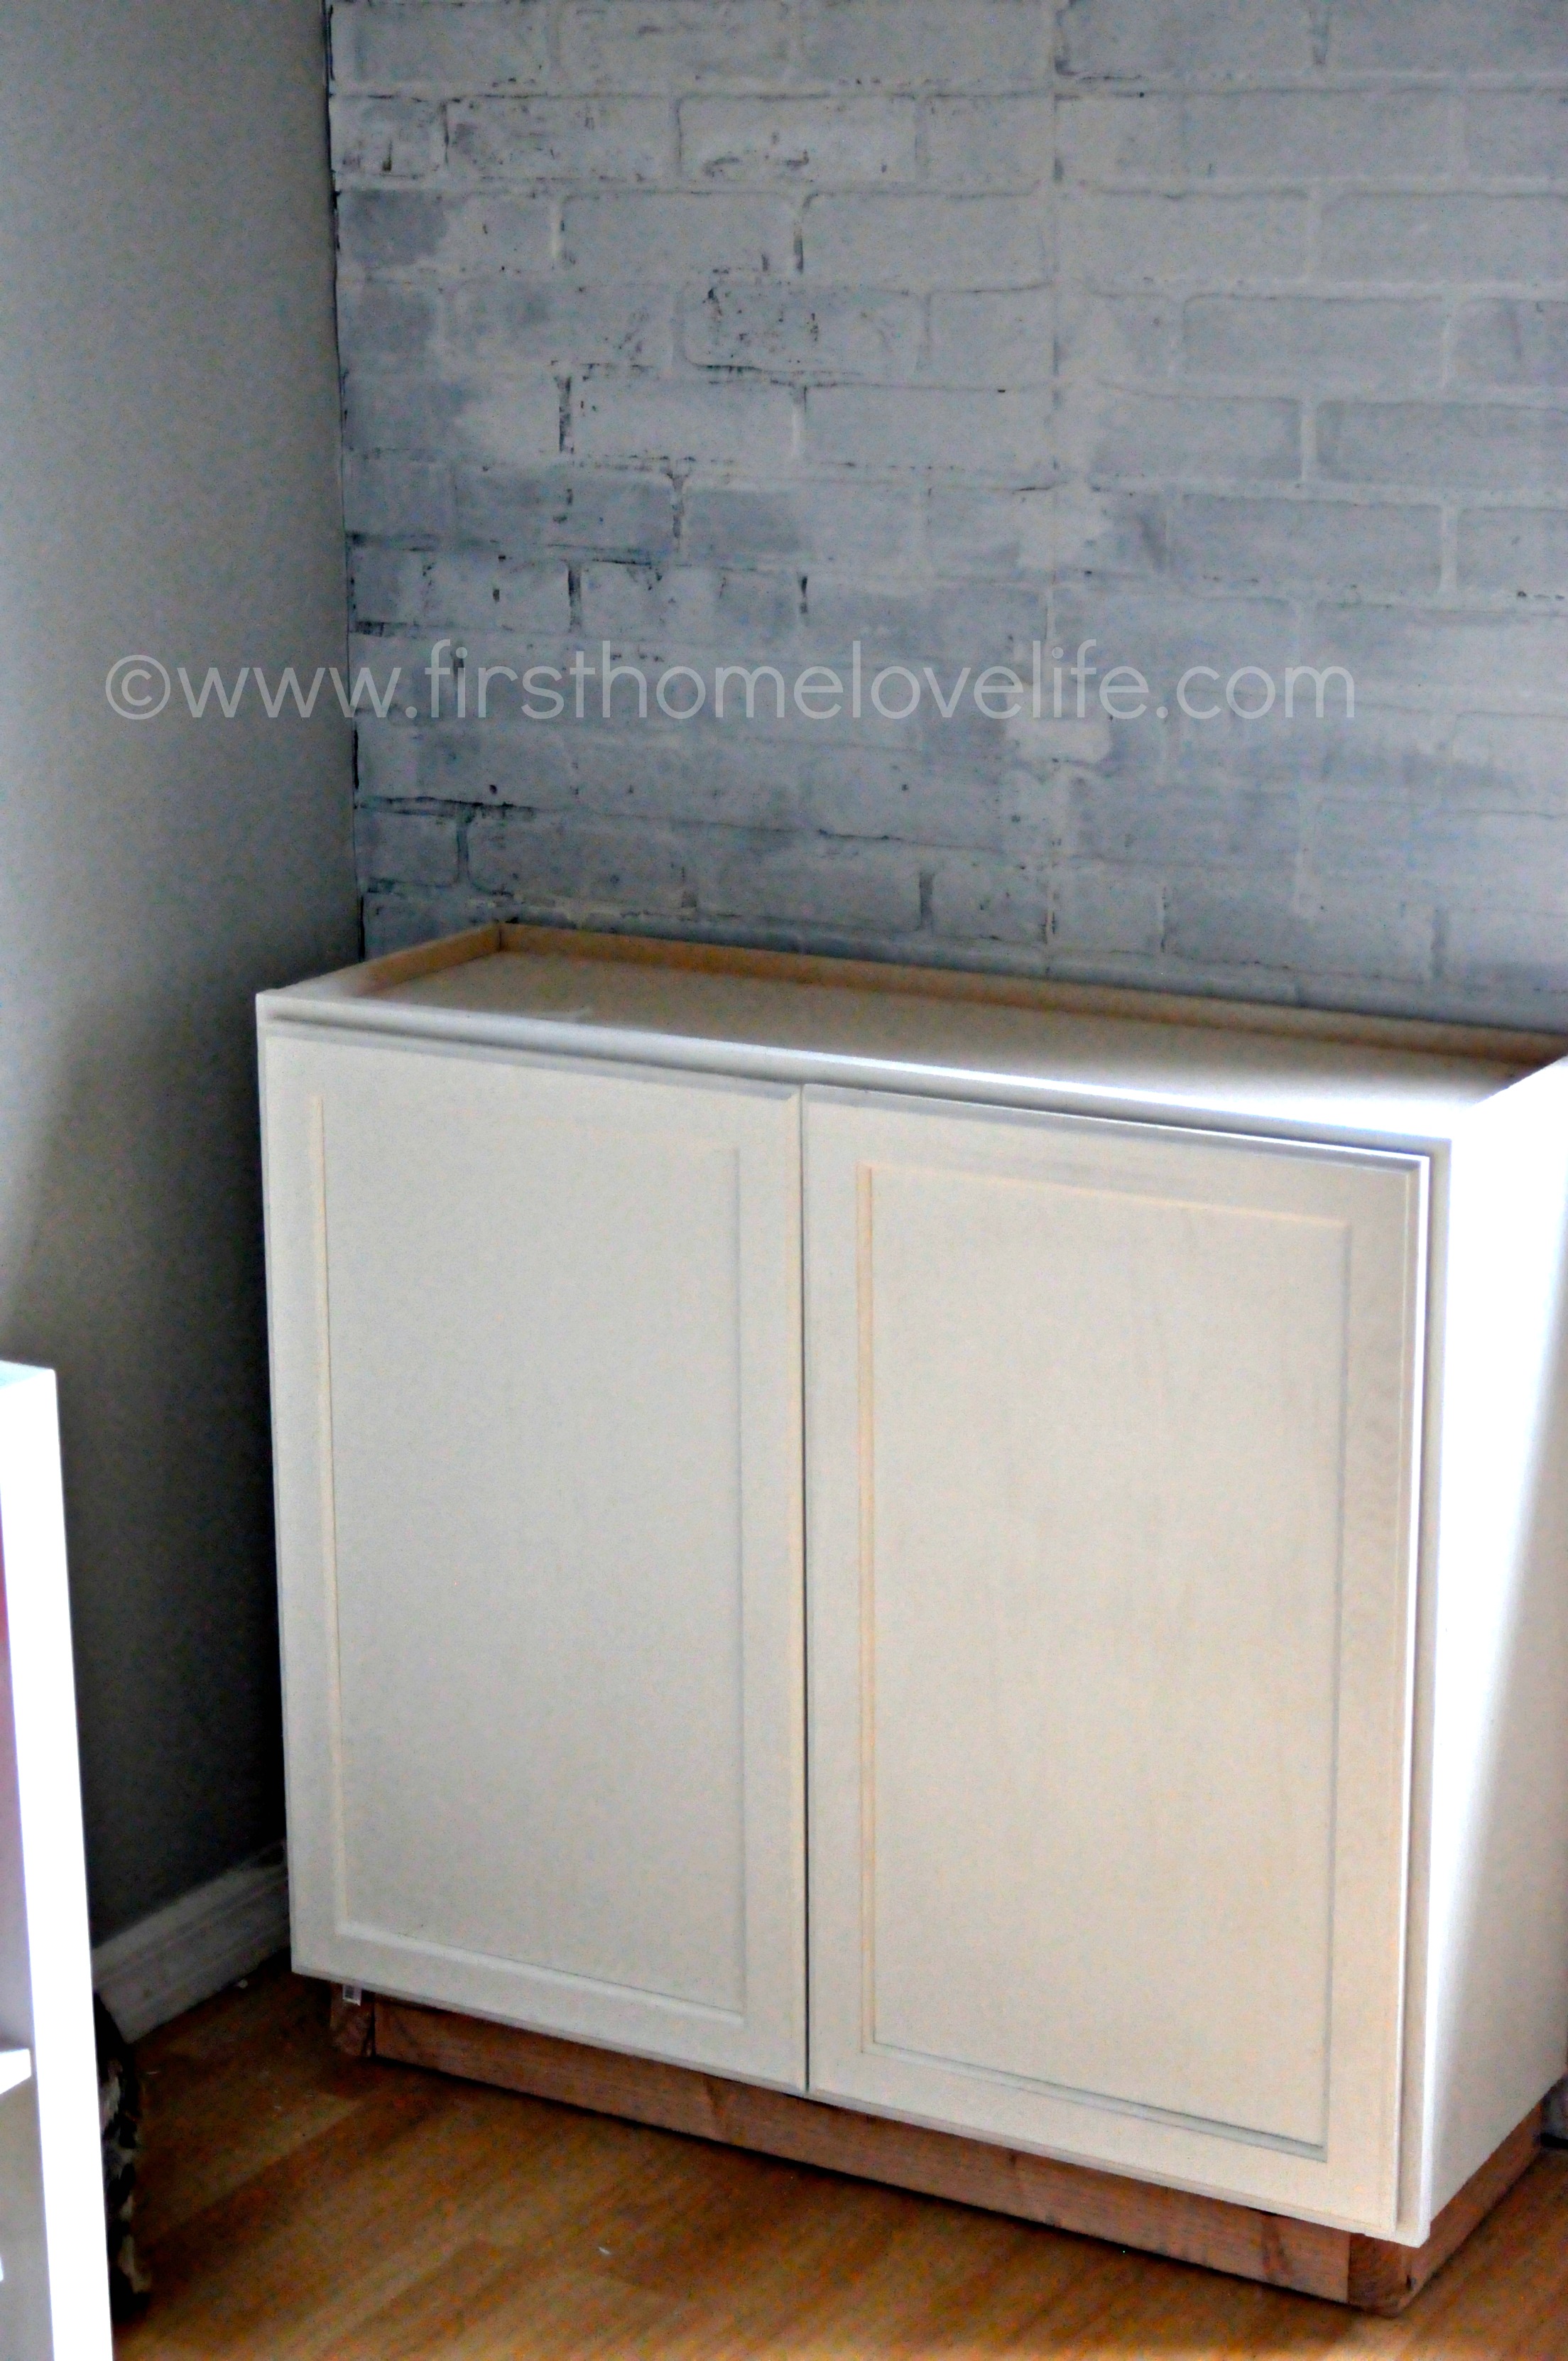 Ikea White Paint Cabinets First Home Love Life